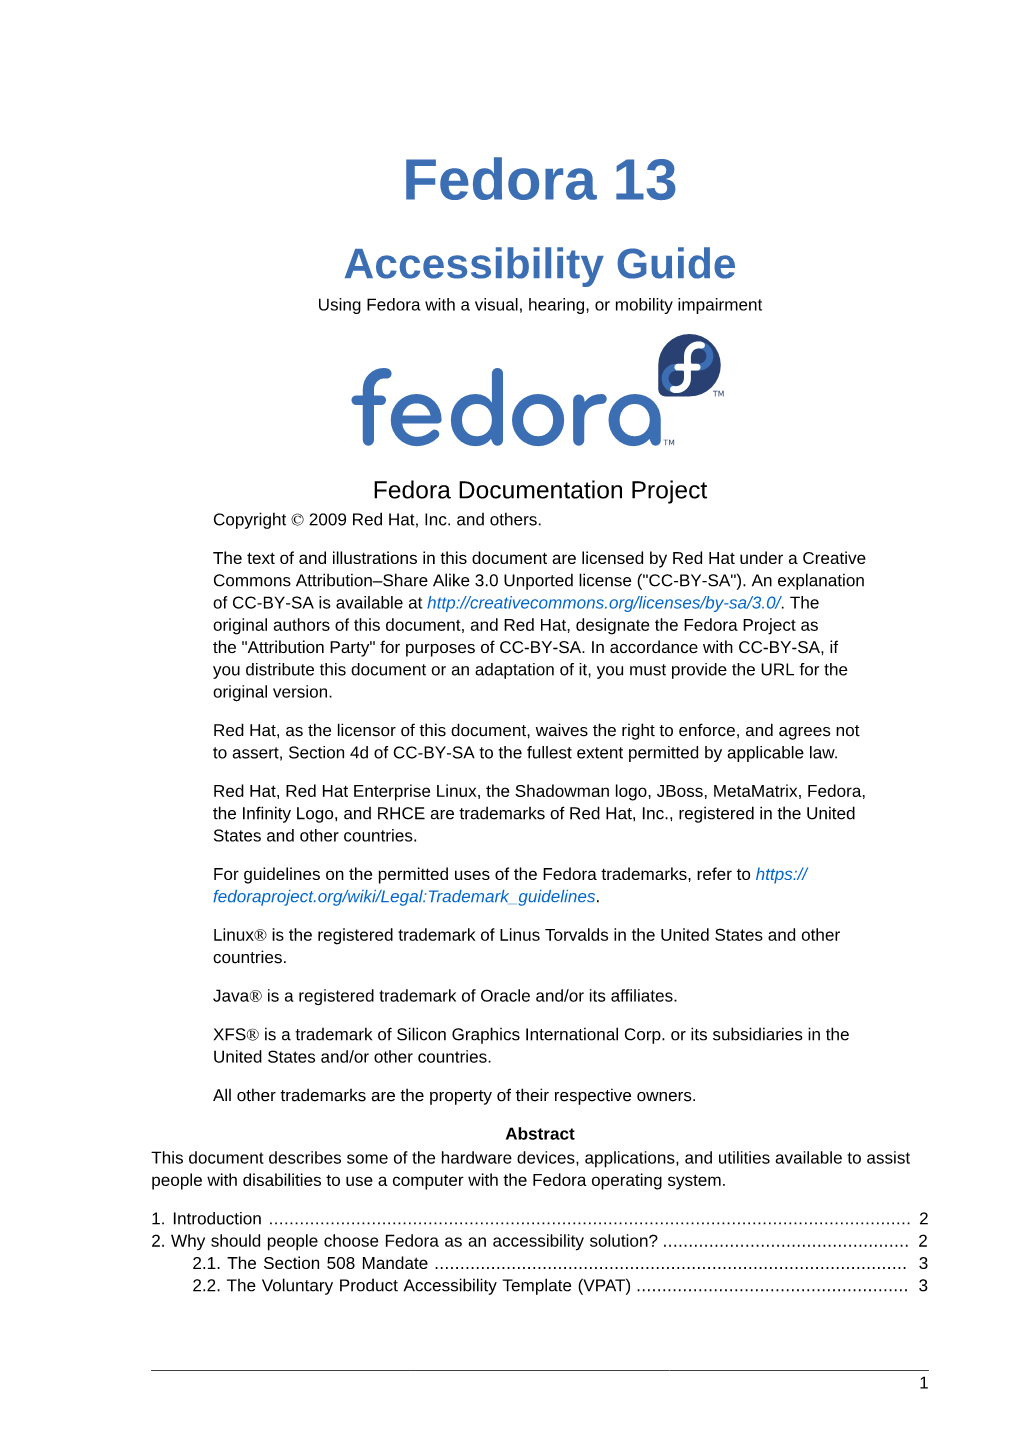 Accessibility Guide Using Fedora with a Visual, Hearing, Or Mobility Impairment